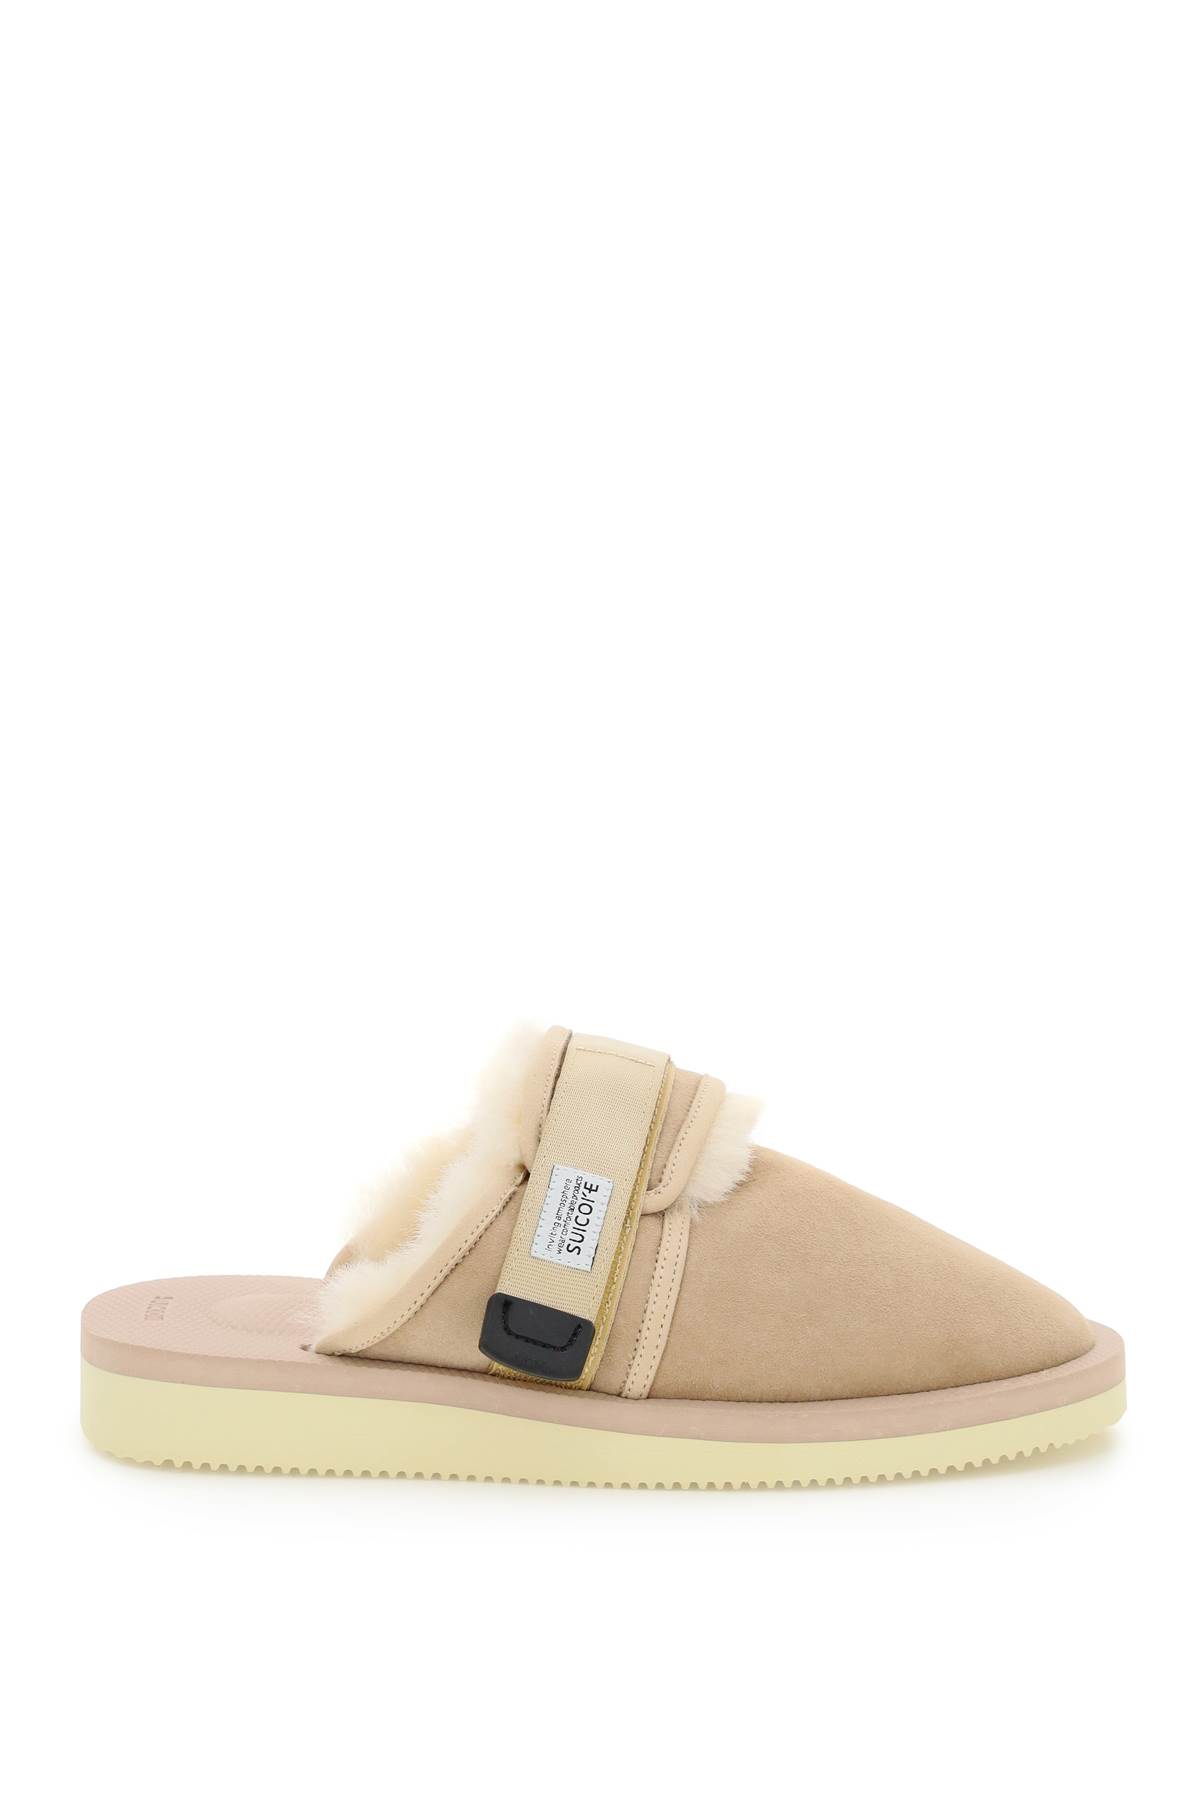 SUICOKE Zavo Suede Sabot With Shearling